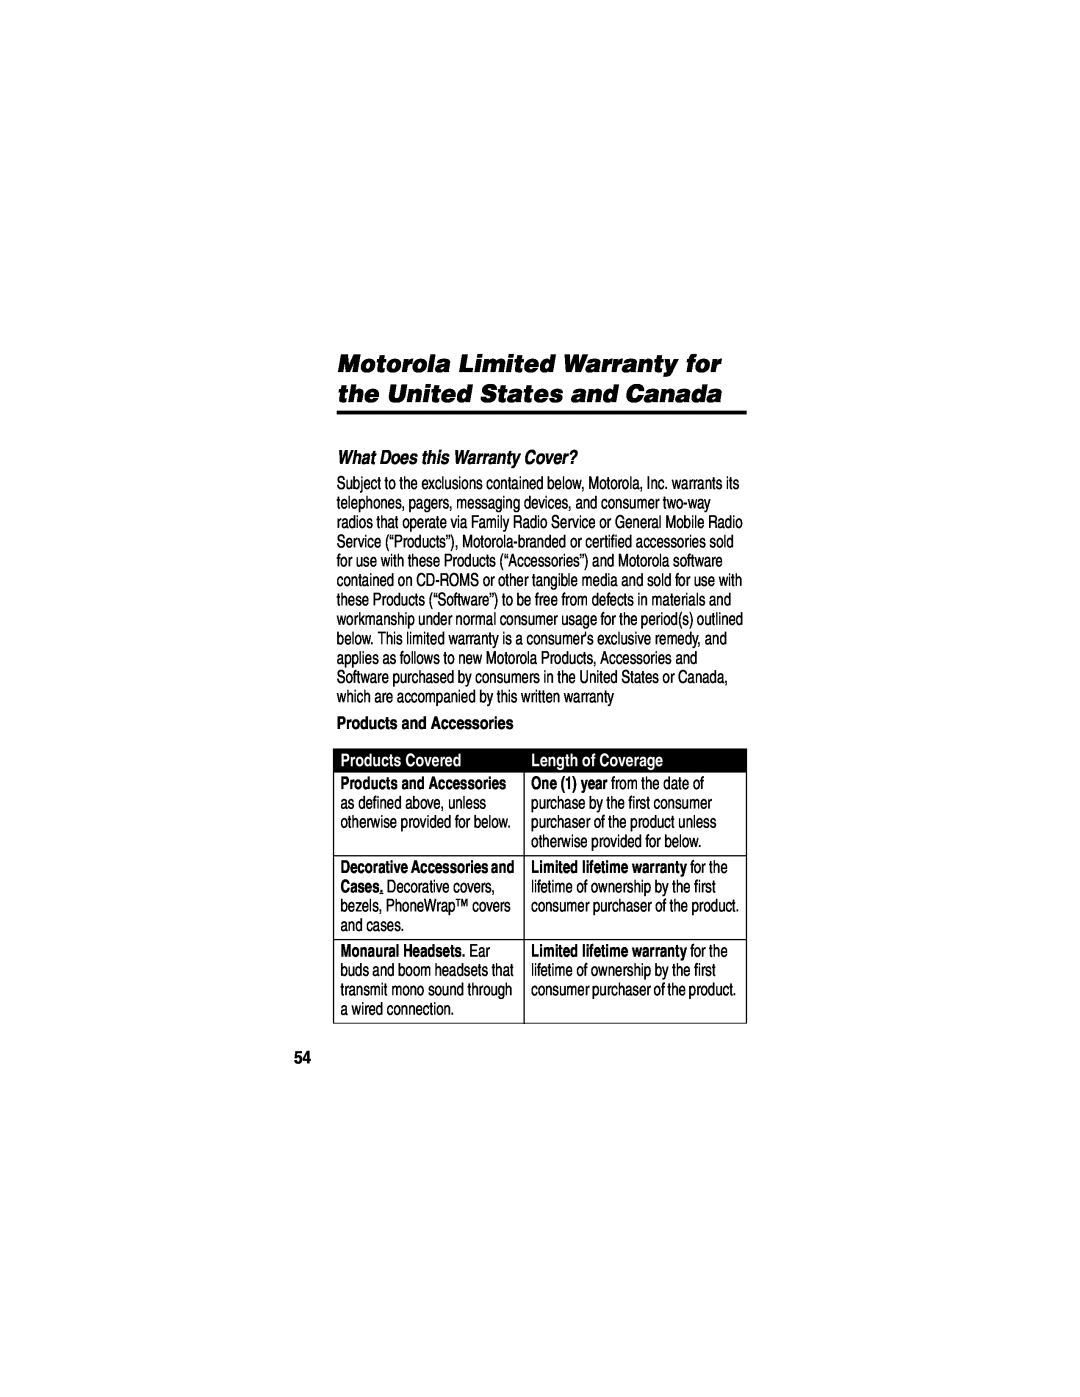 Motorola MD490 manual Motorola Limited Warranty for the United States and Canada, What Does this Warranty Cover? 